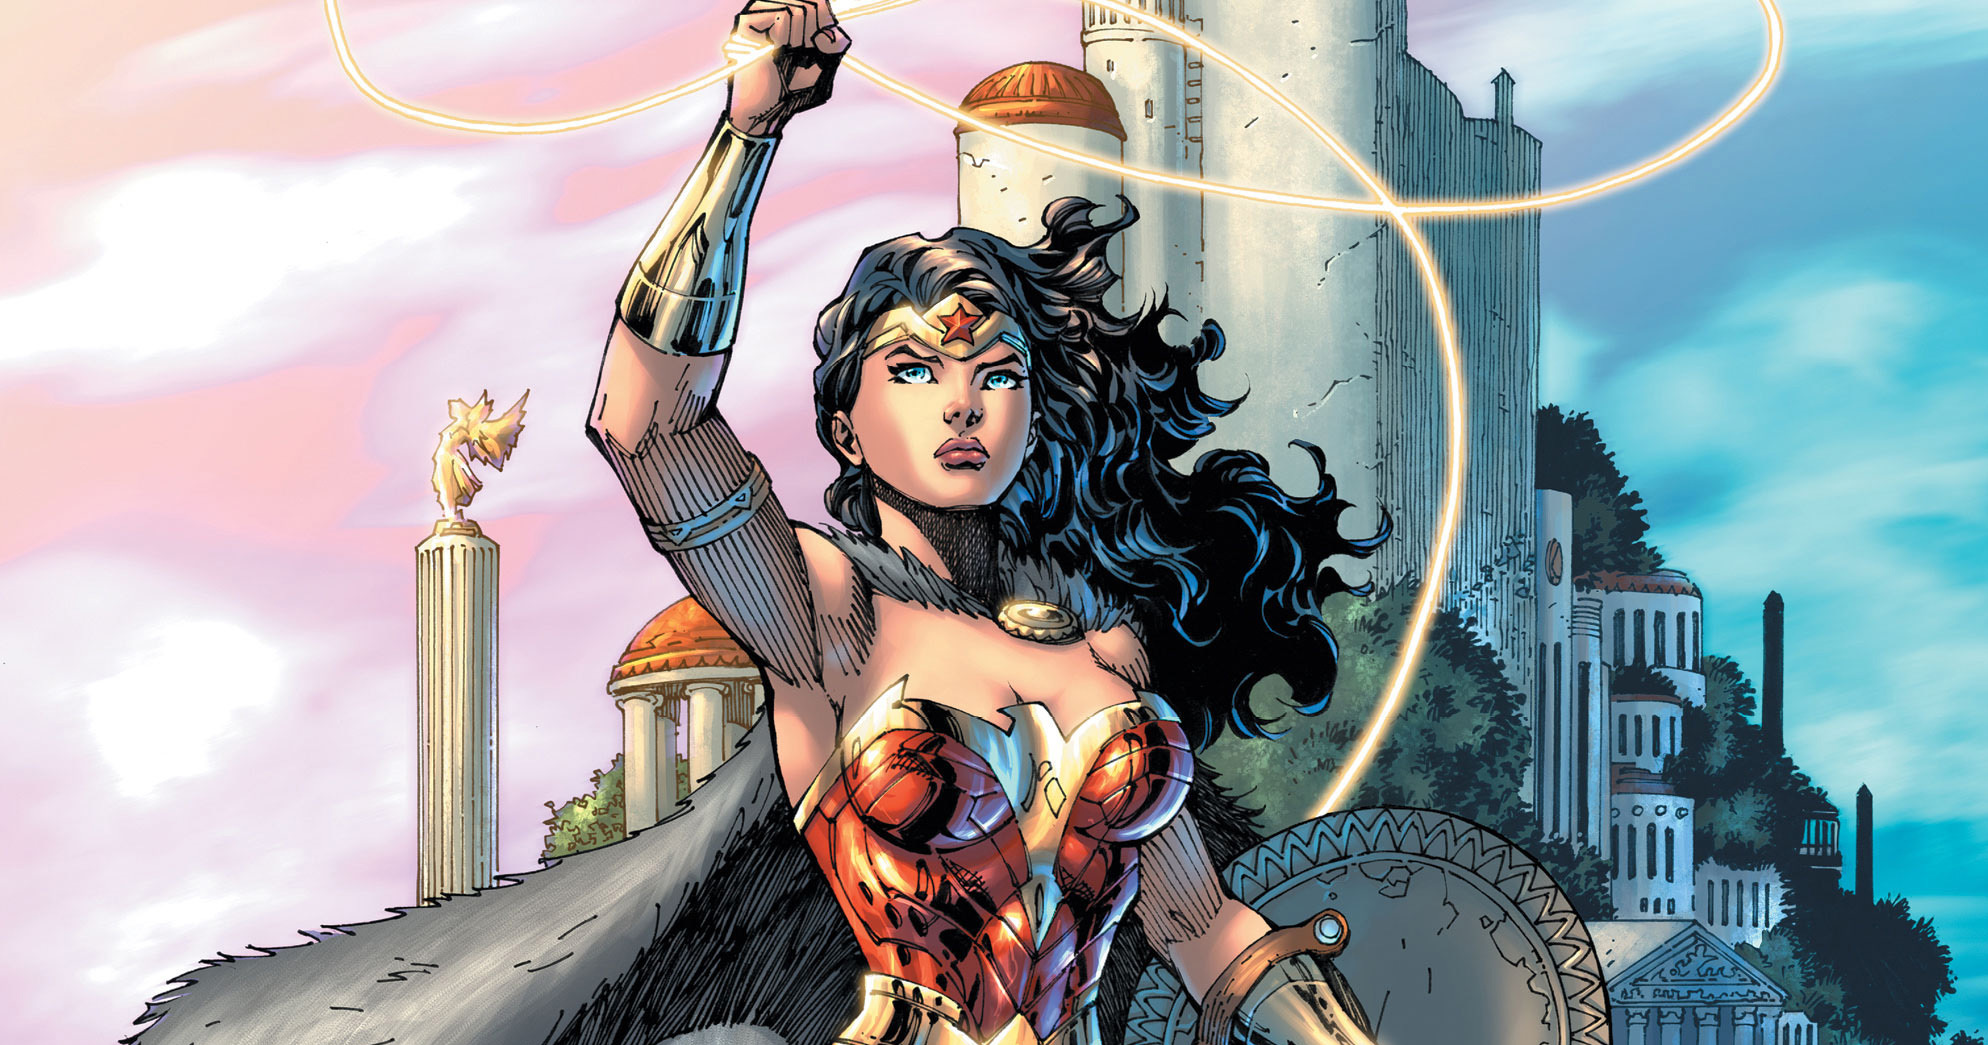 ‘Wonder Woman’ #1 sells out and goes back to print